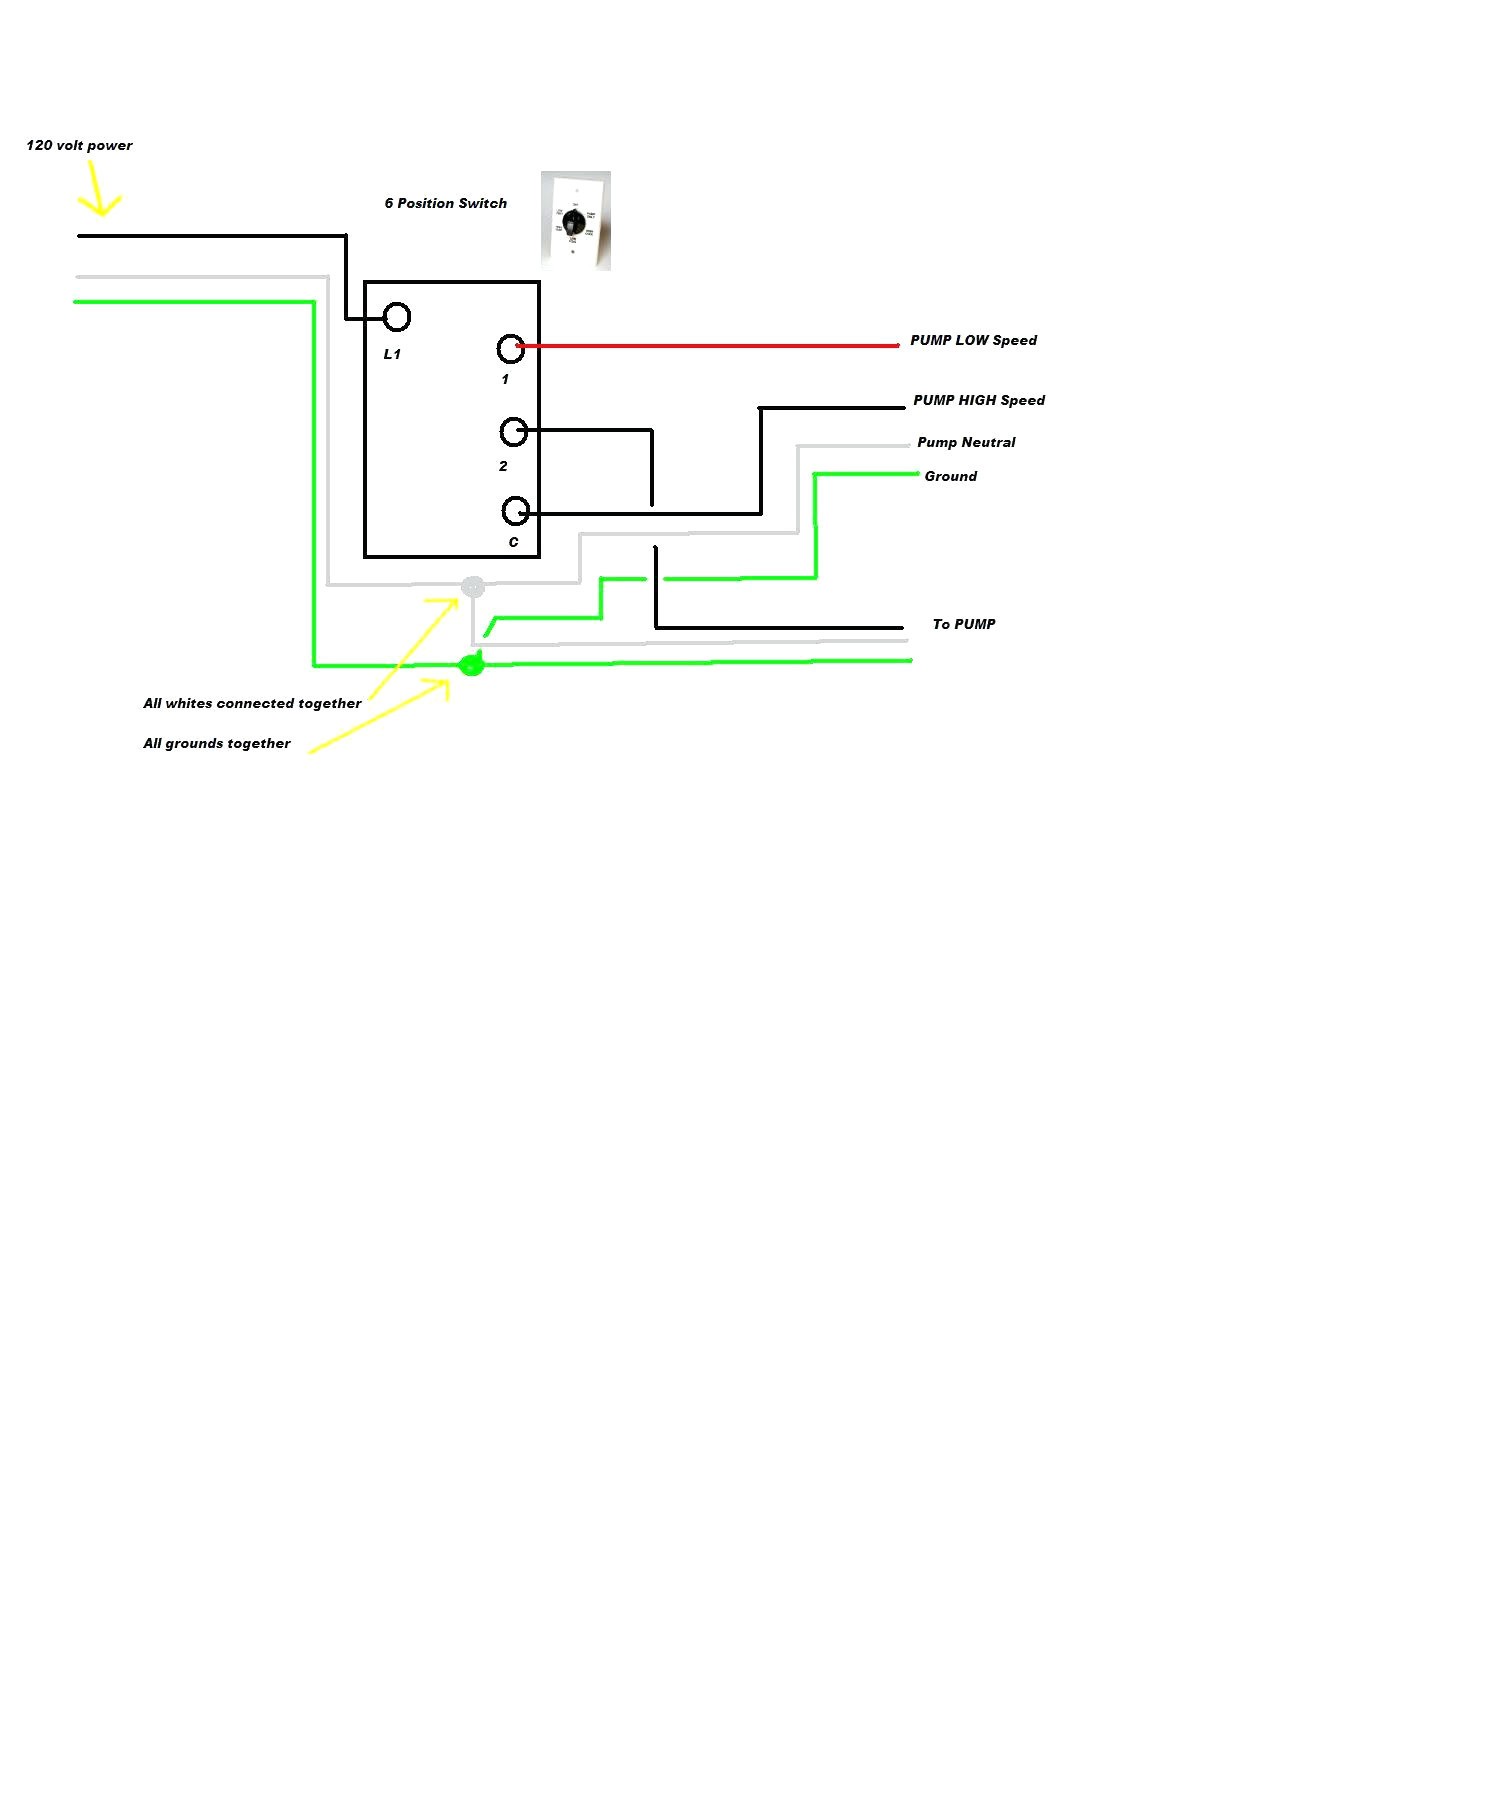 Diagram Wiring Controlling 110v Swamp Cooler Using Nest Thermostat Home Throughout Switch